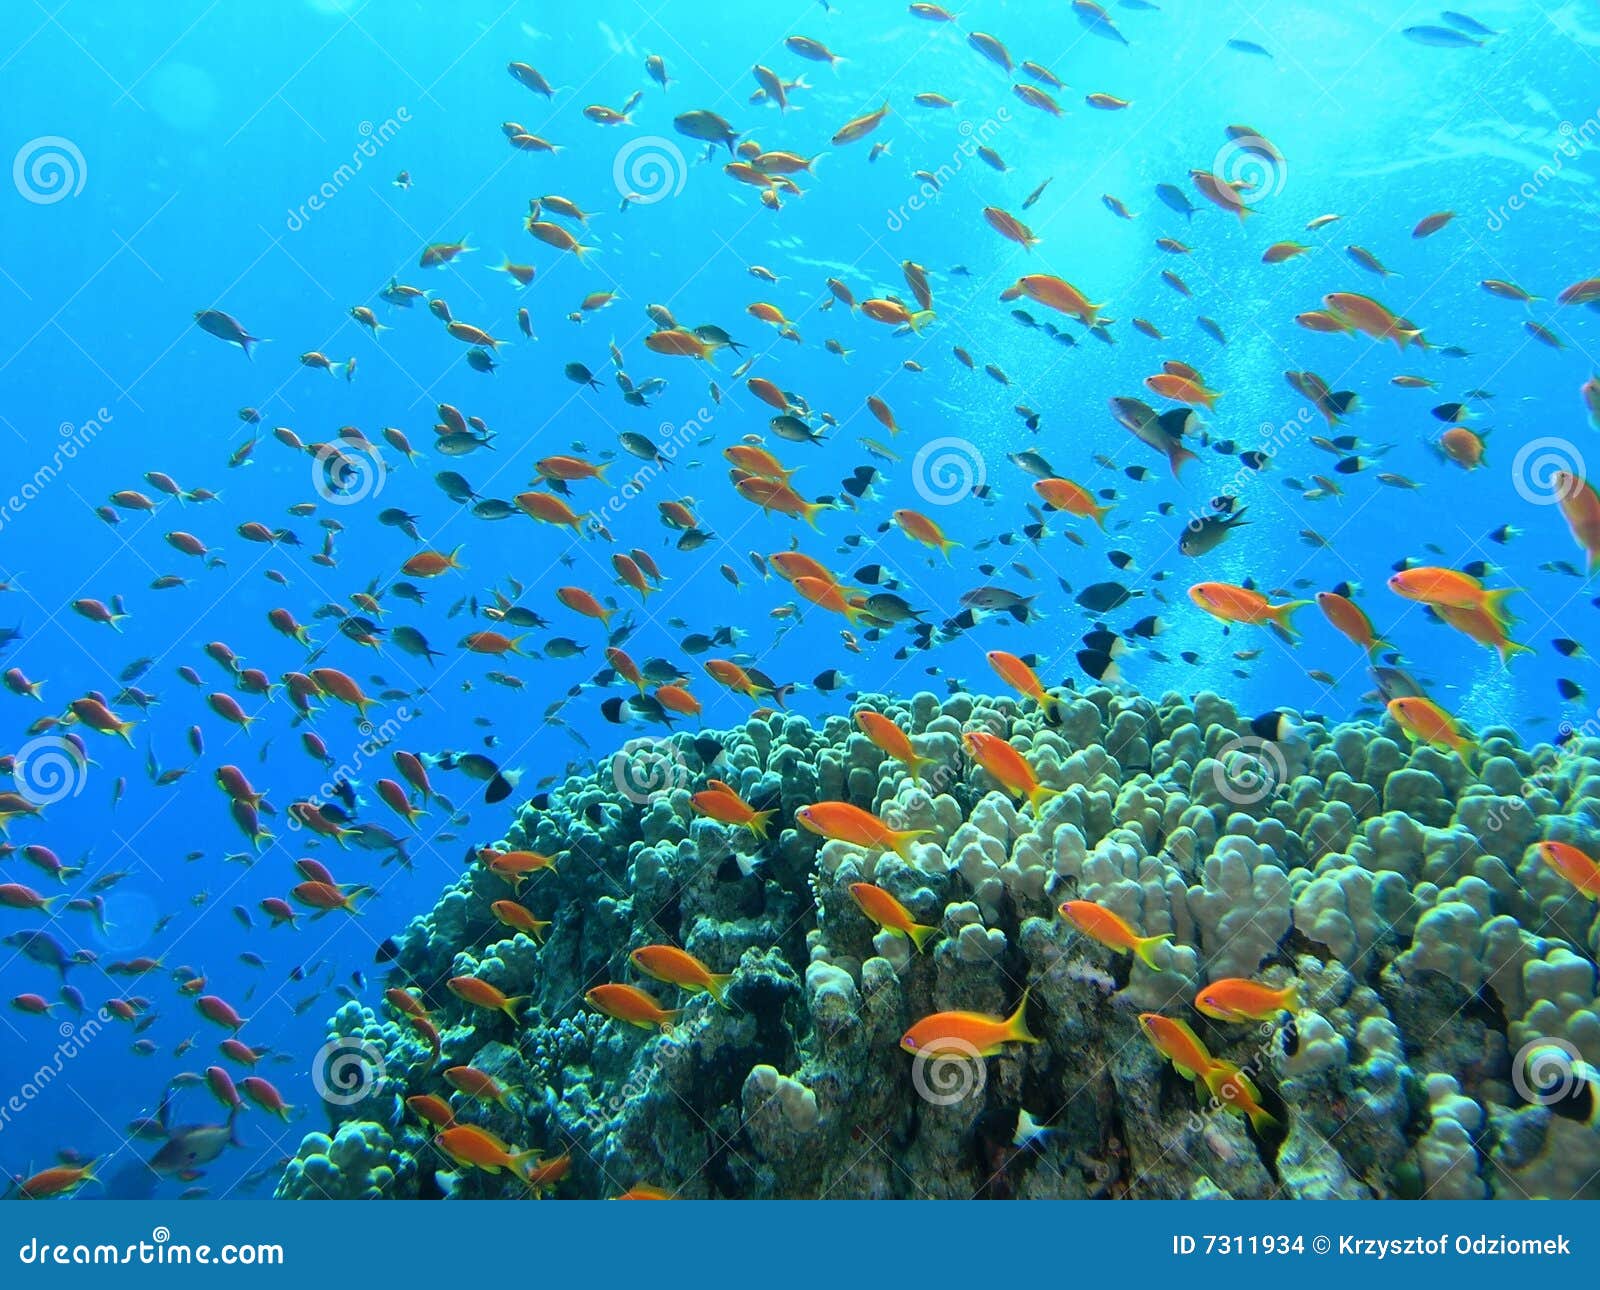 Shoal of fish on the reef stock photo. Image of underwater - 7311934